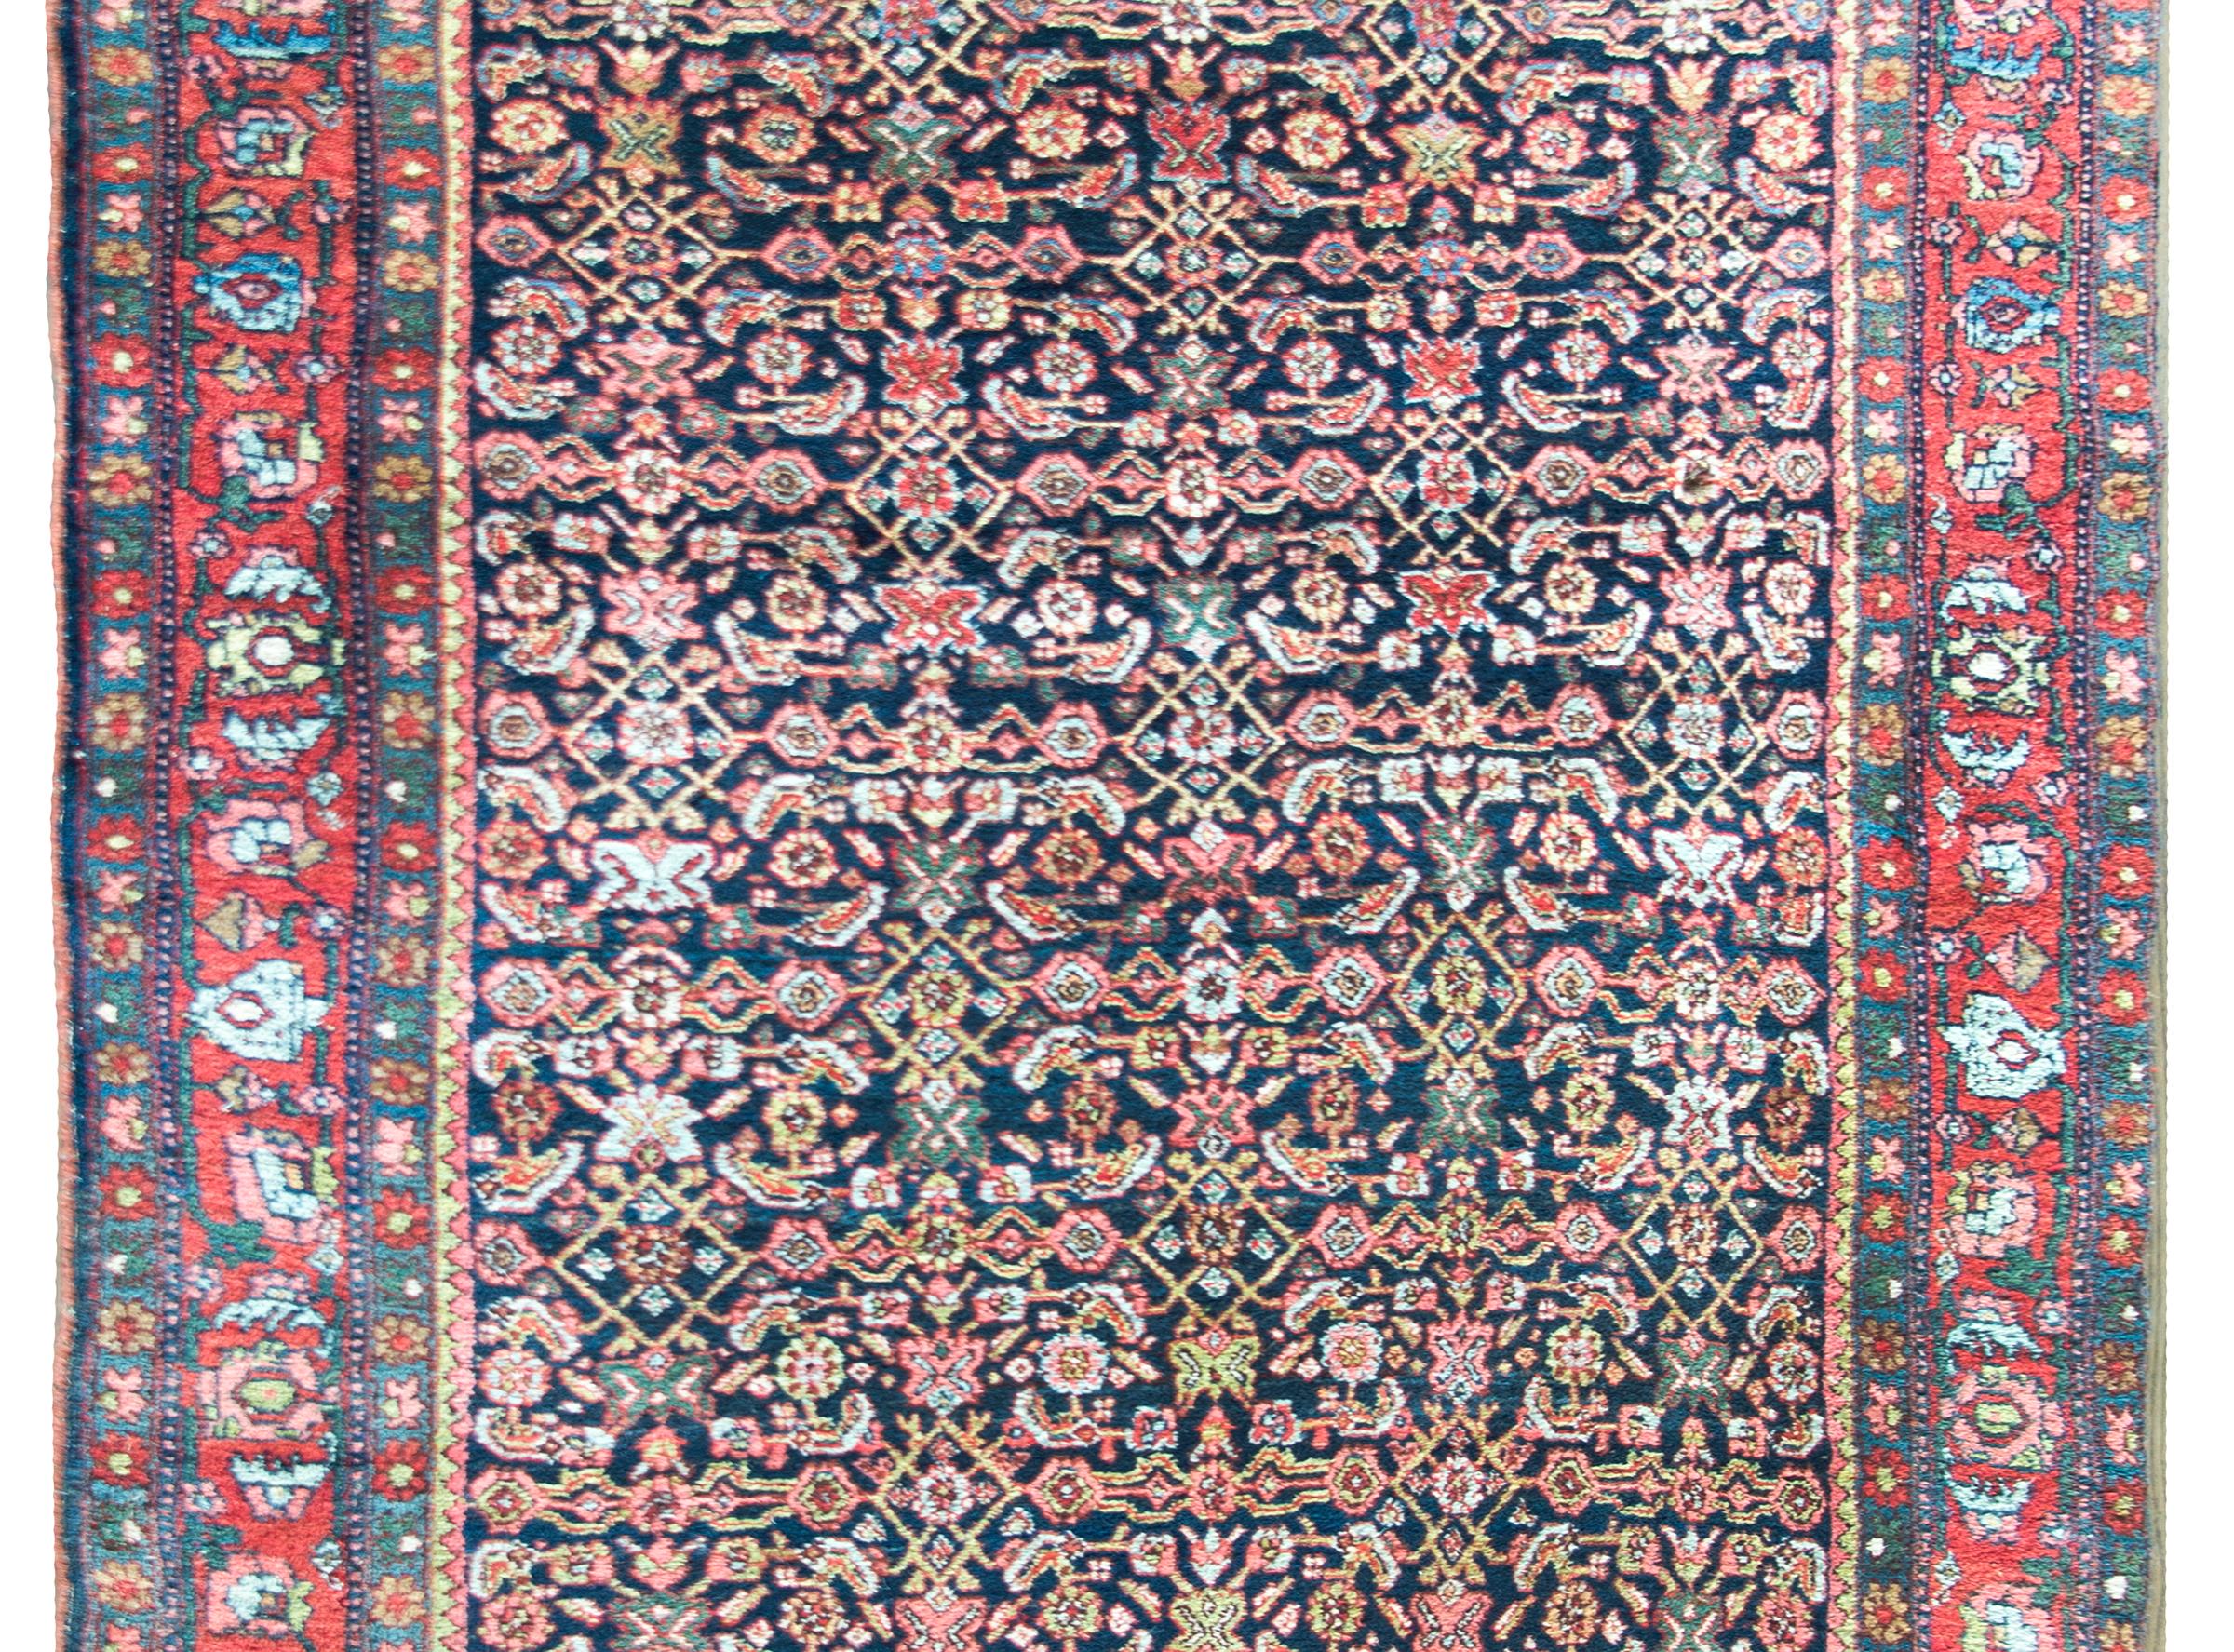 A remarkable early 20th century Persian Bidjar rug with an all-over trellis floral pattern woven with myriad stylized flowers, leaves, and scrolling vines, surrounded by an incredible complex border with a wide central floral patterned stripe